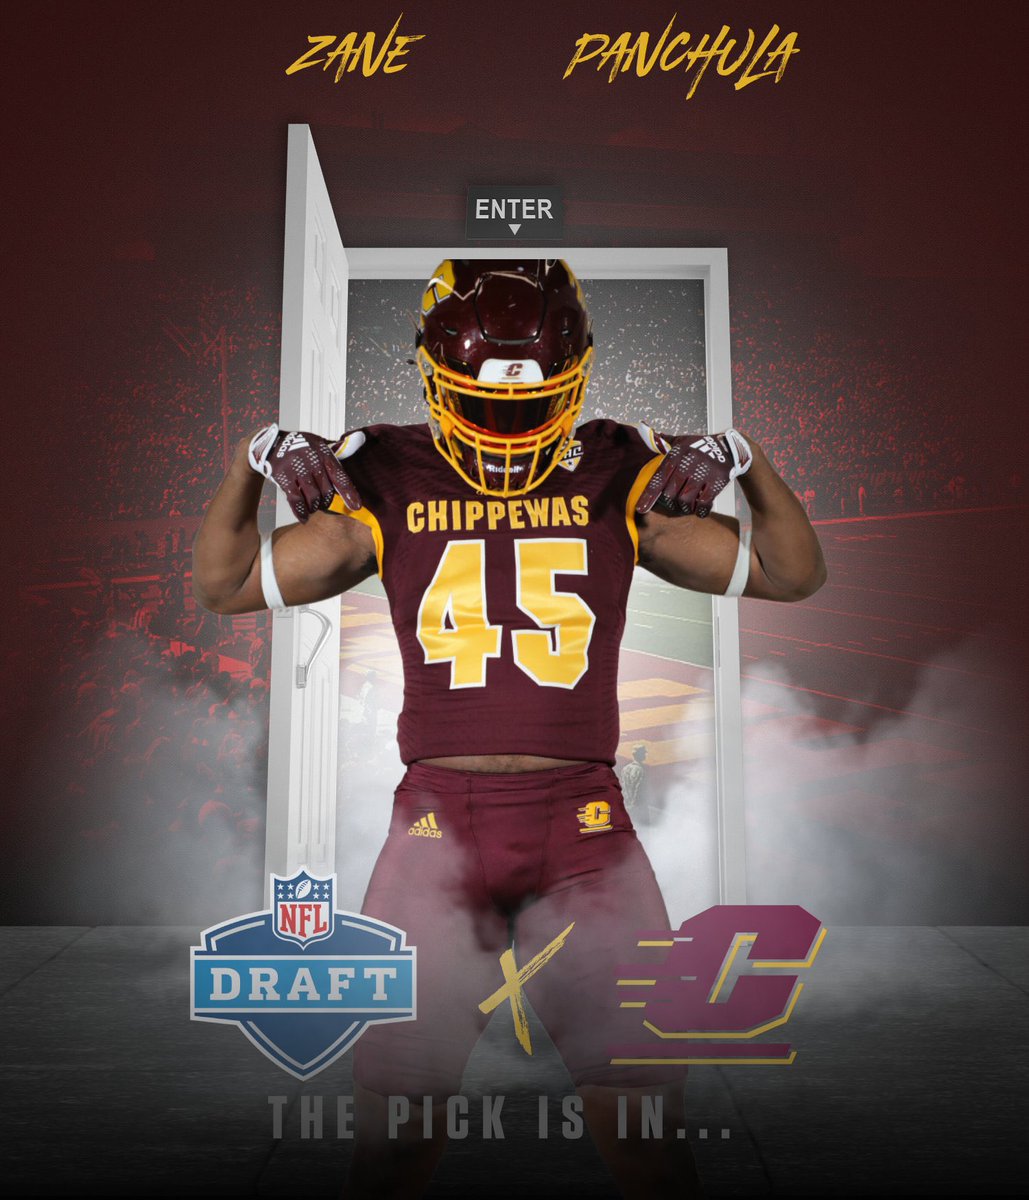 Good luck coach @CoachMikeMcGee @CMU_Football in the draft! Thanks for the shout out @CoachMcElwain